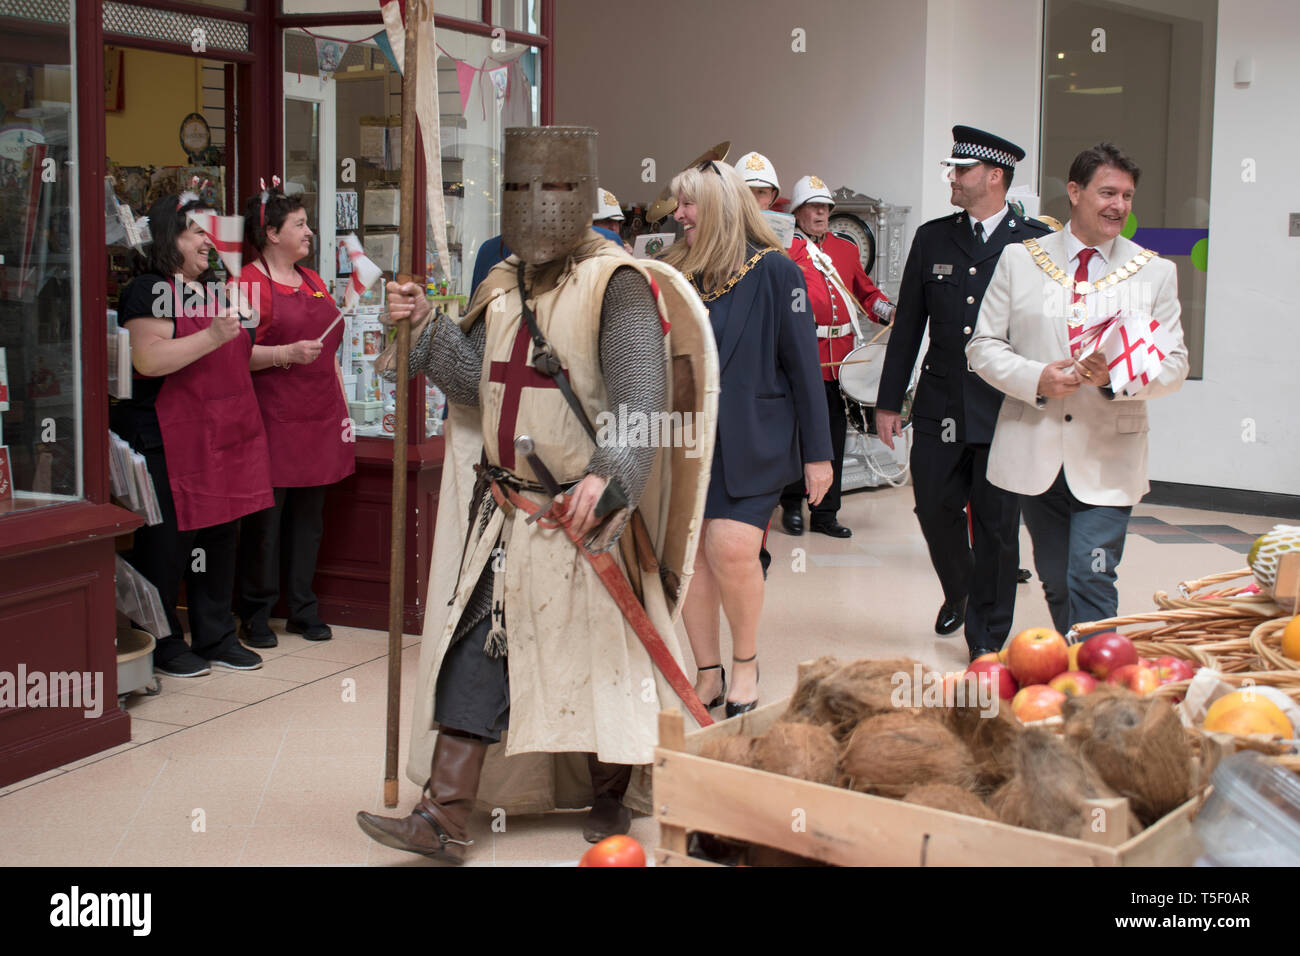 St Georges Day 23rd April 2019, Dartford Kent, parade through shopping centre off the high street, Councillor David Mote and town hall dignitaries. 2010s HOMER SYKES Stock Photo